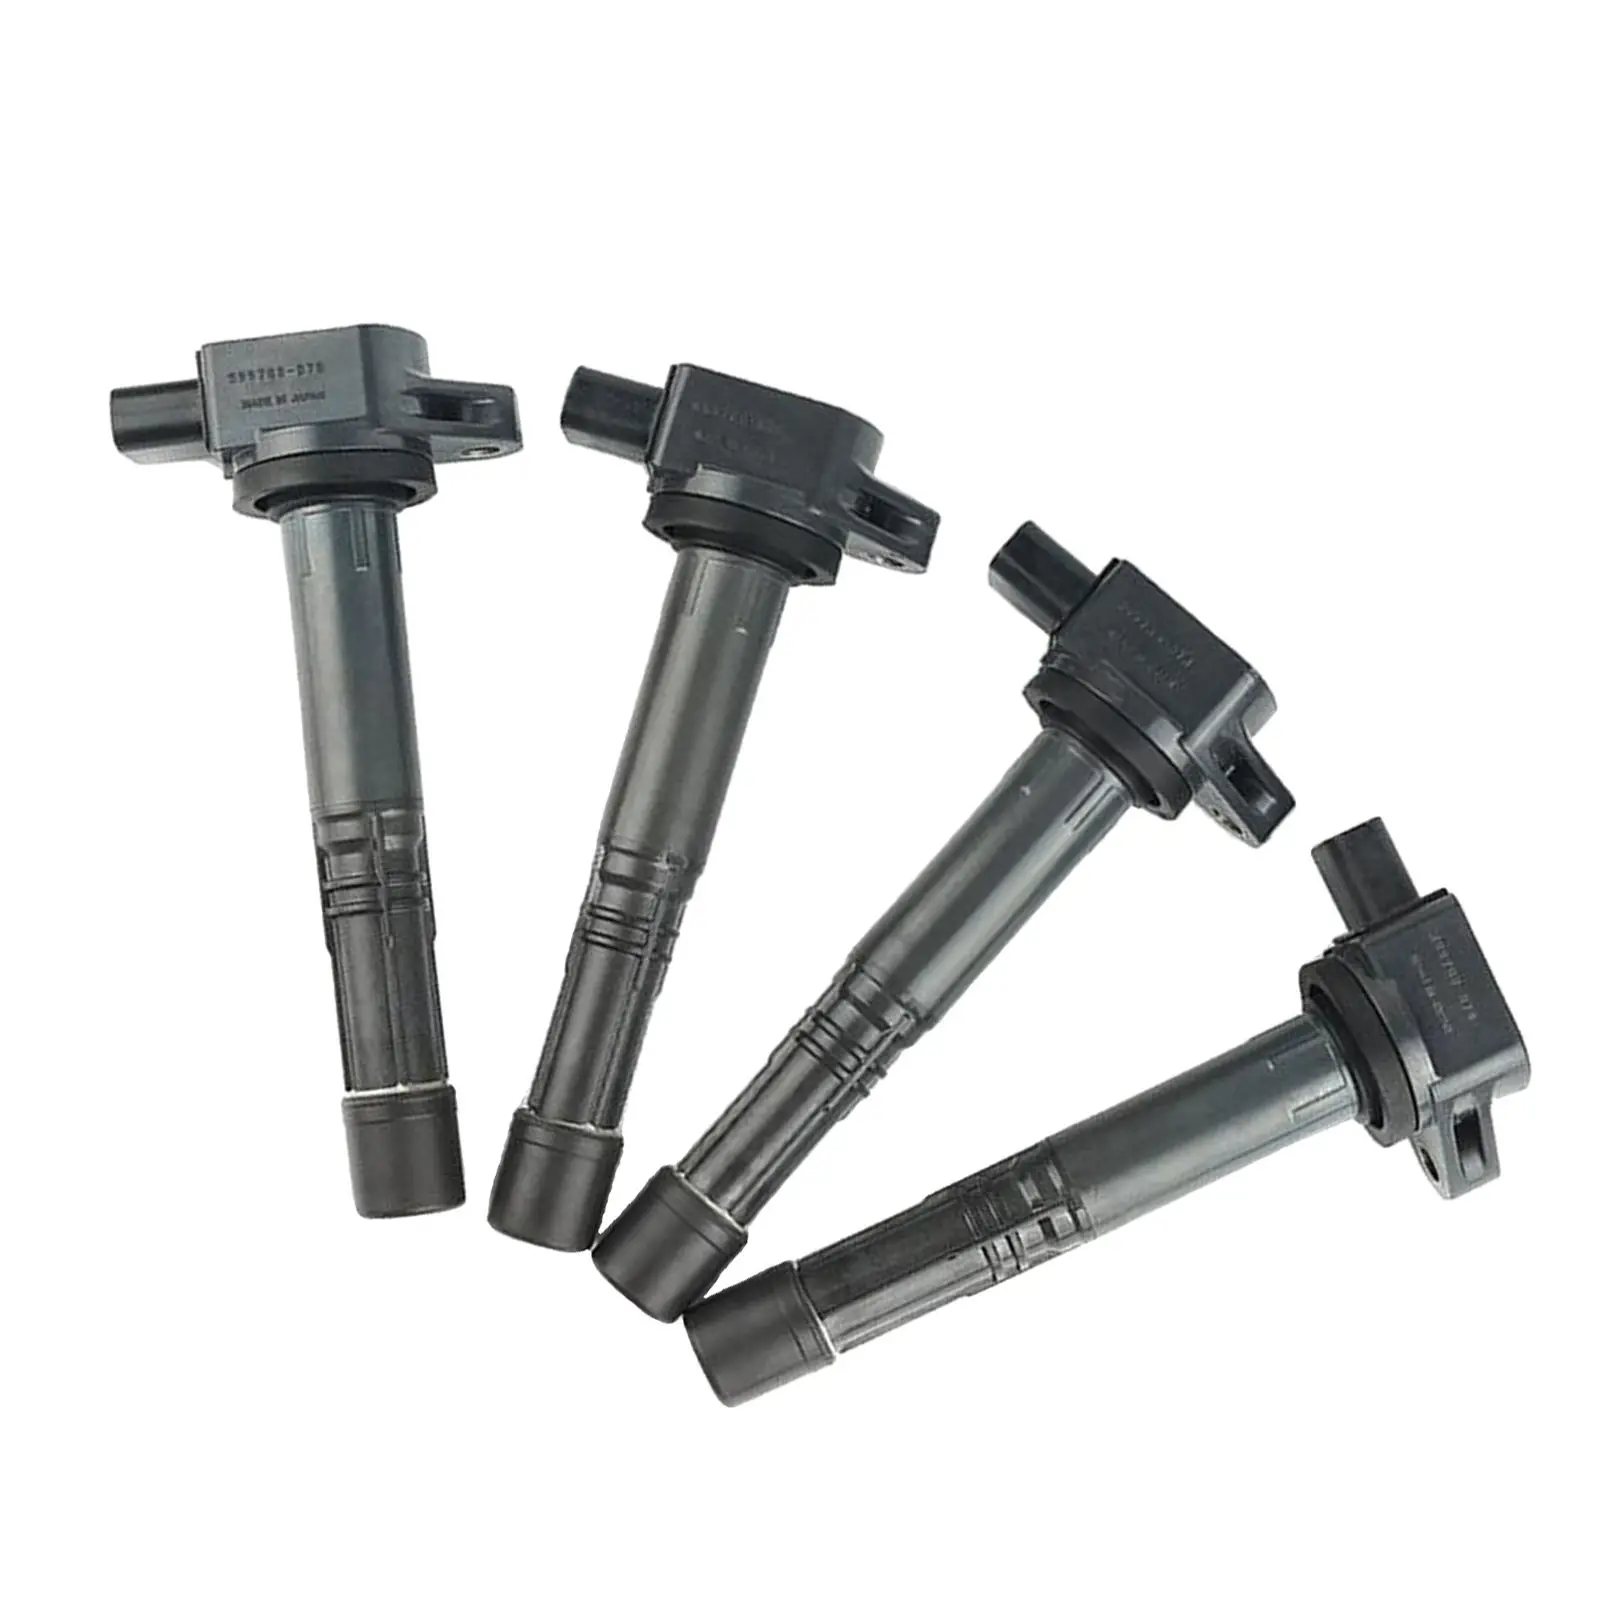 New 4PCS Ignition Coil for Honda Civic Element 30520RRA007, with Directly Replacement